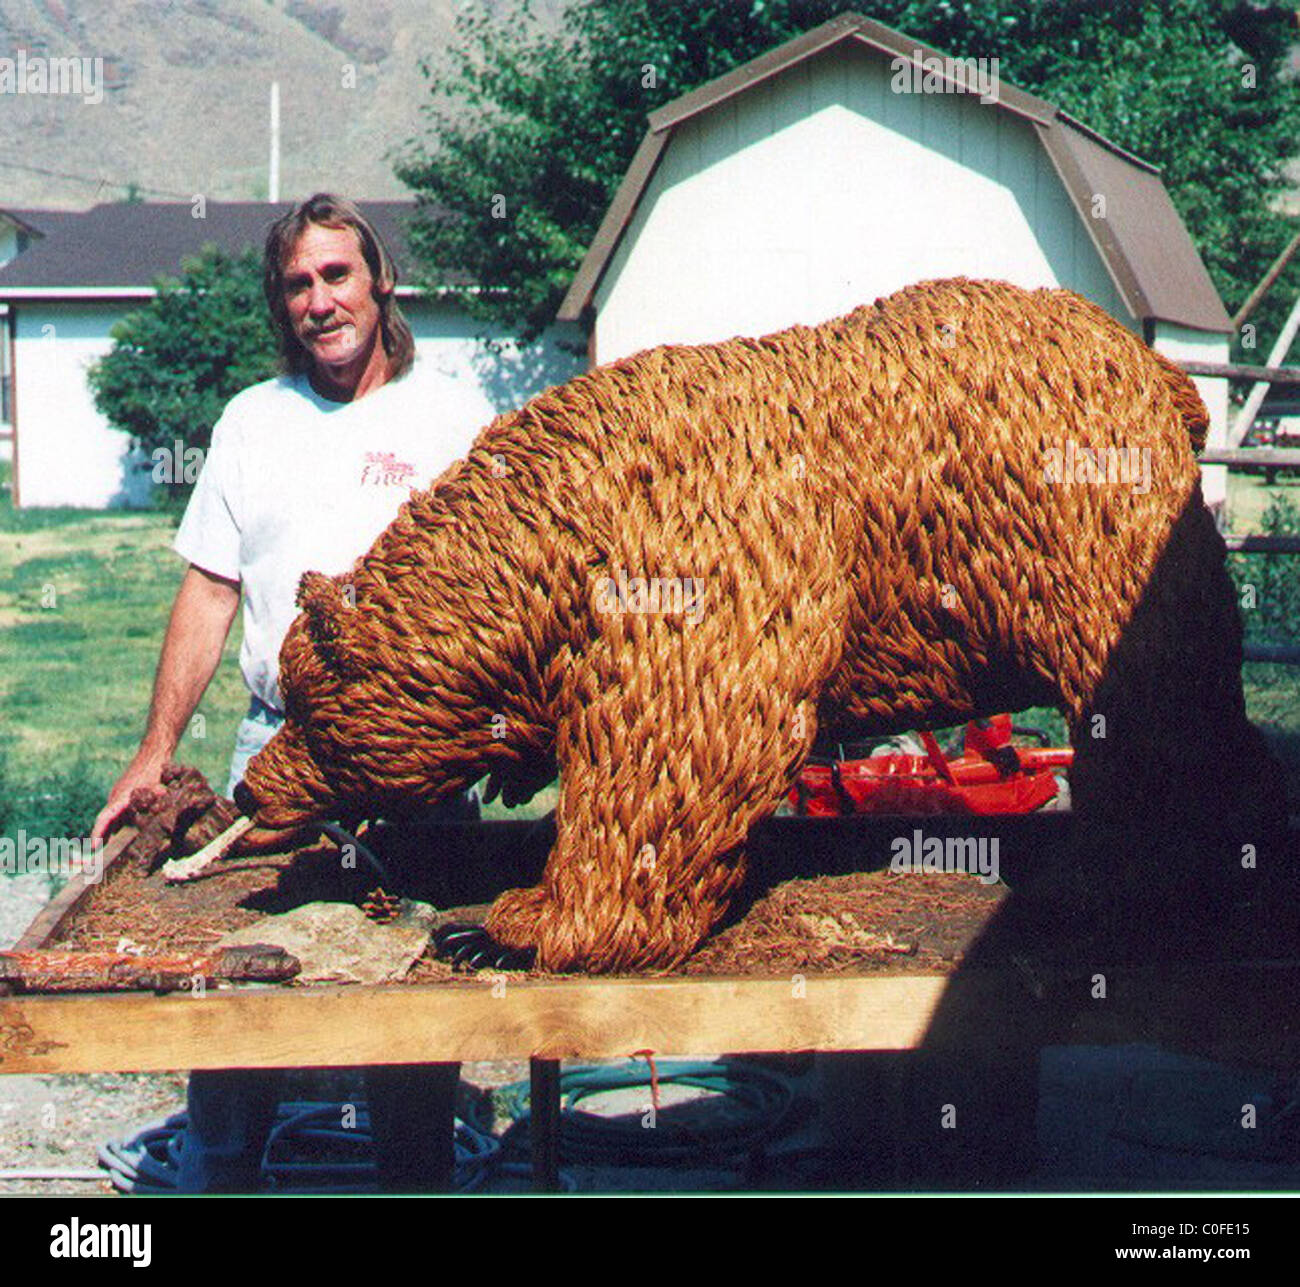 PINE BEAR This life-sized bear has been hand-crafted using pine needles.   Richard Carpenter carefully selects each needle Stock Photo